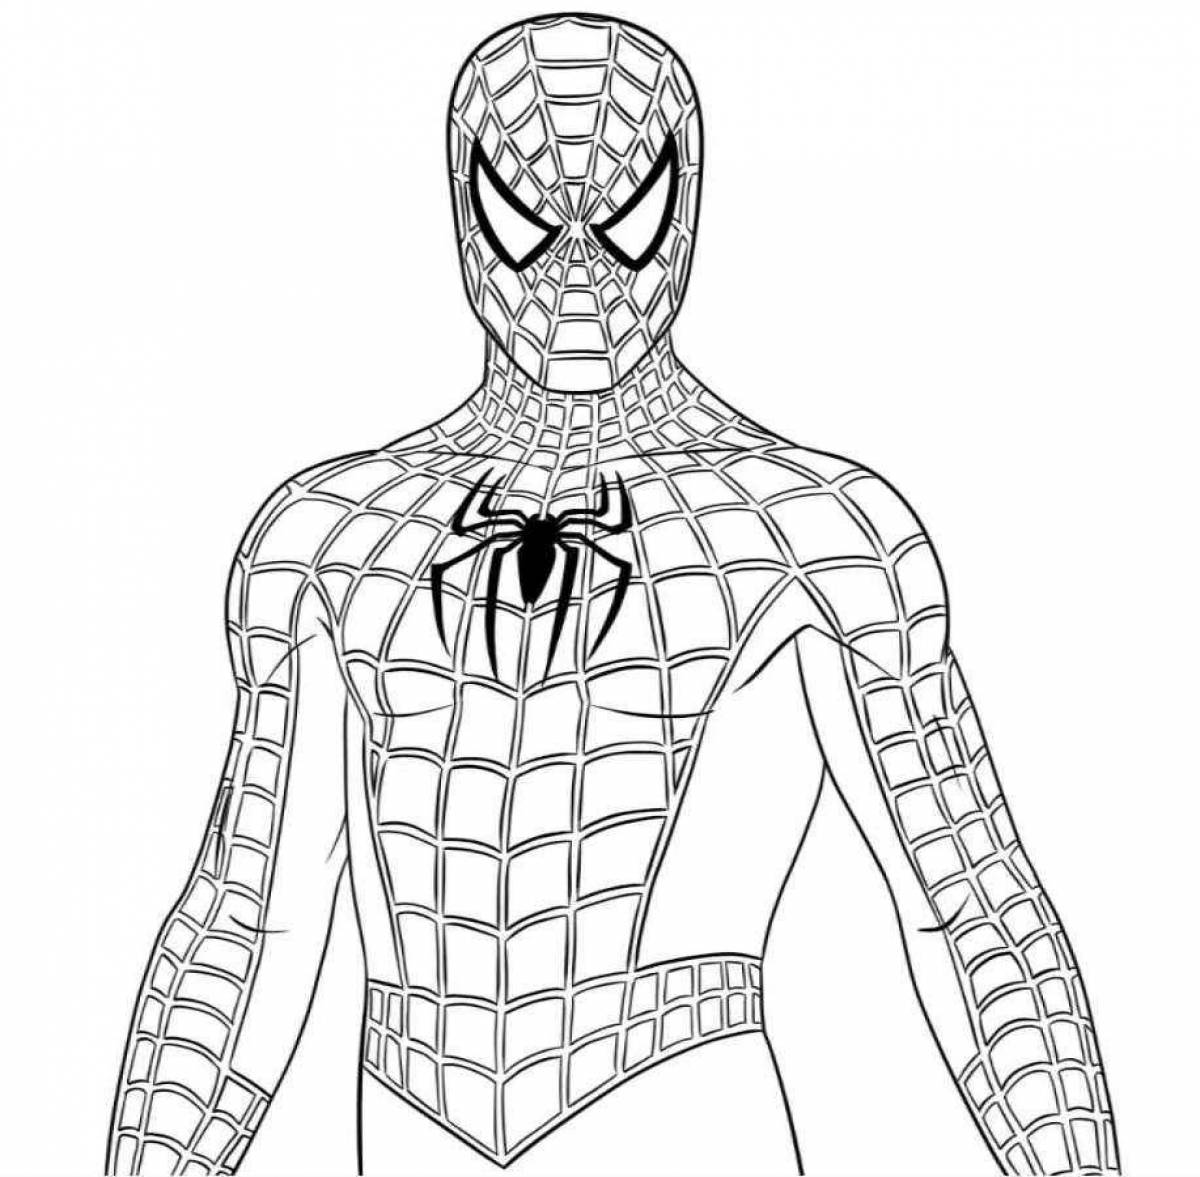 Spiderman's artfully crafted coloring page